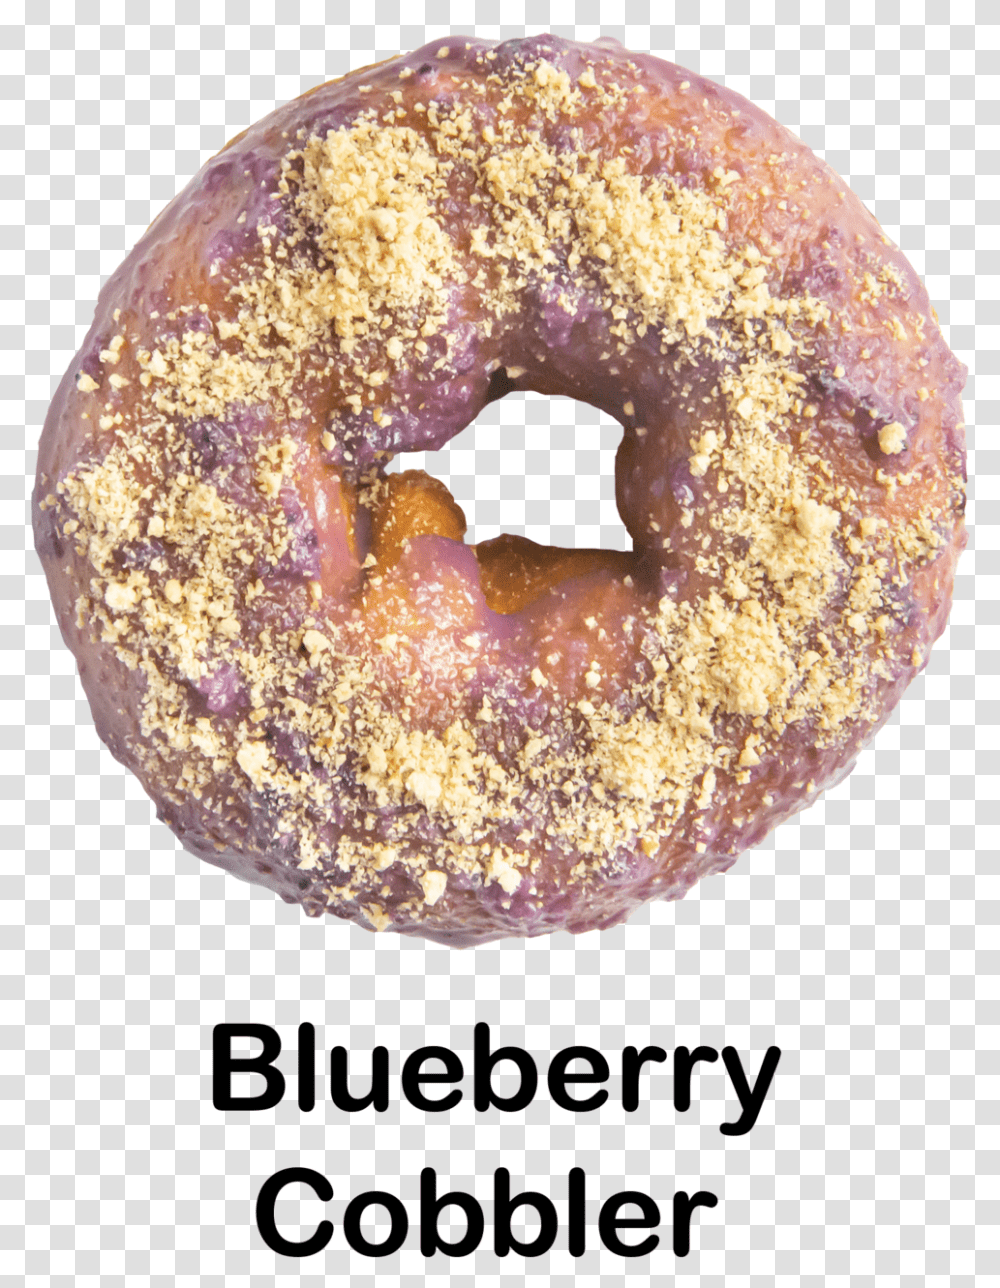 Blueberry Frosting And Graham Cracker Doughnut, Pastry, Dessert, Food, Bread Transparent Png